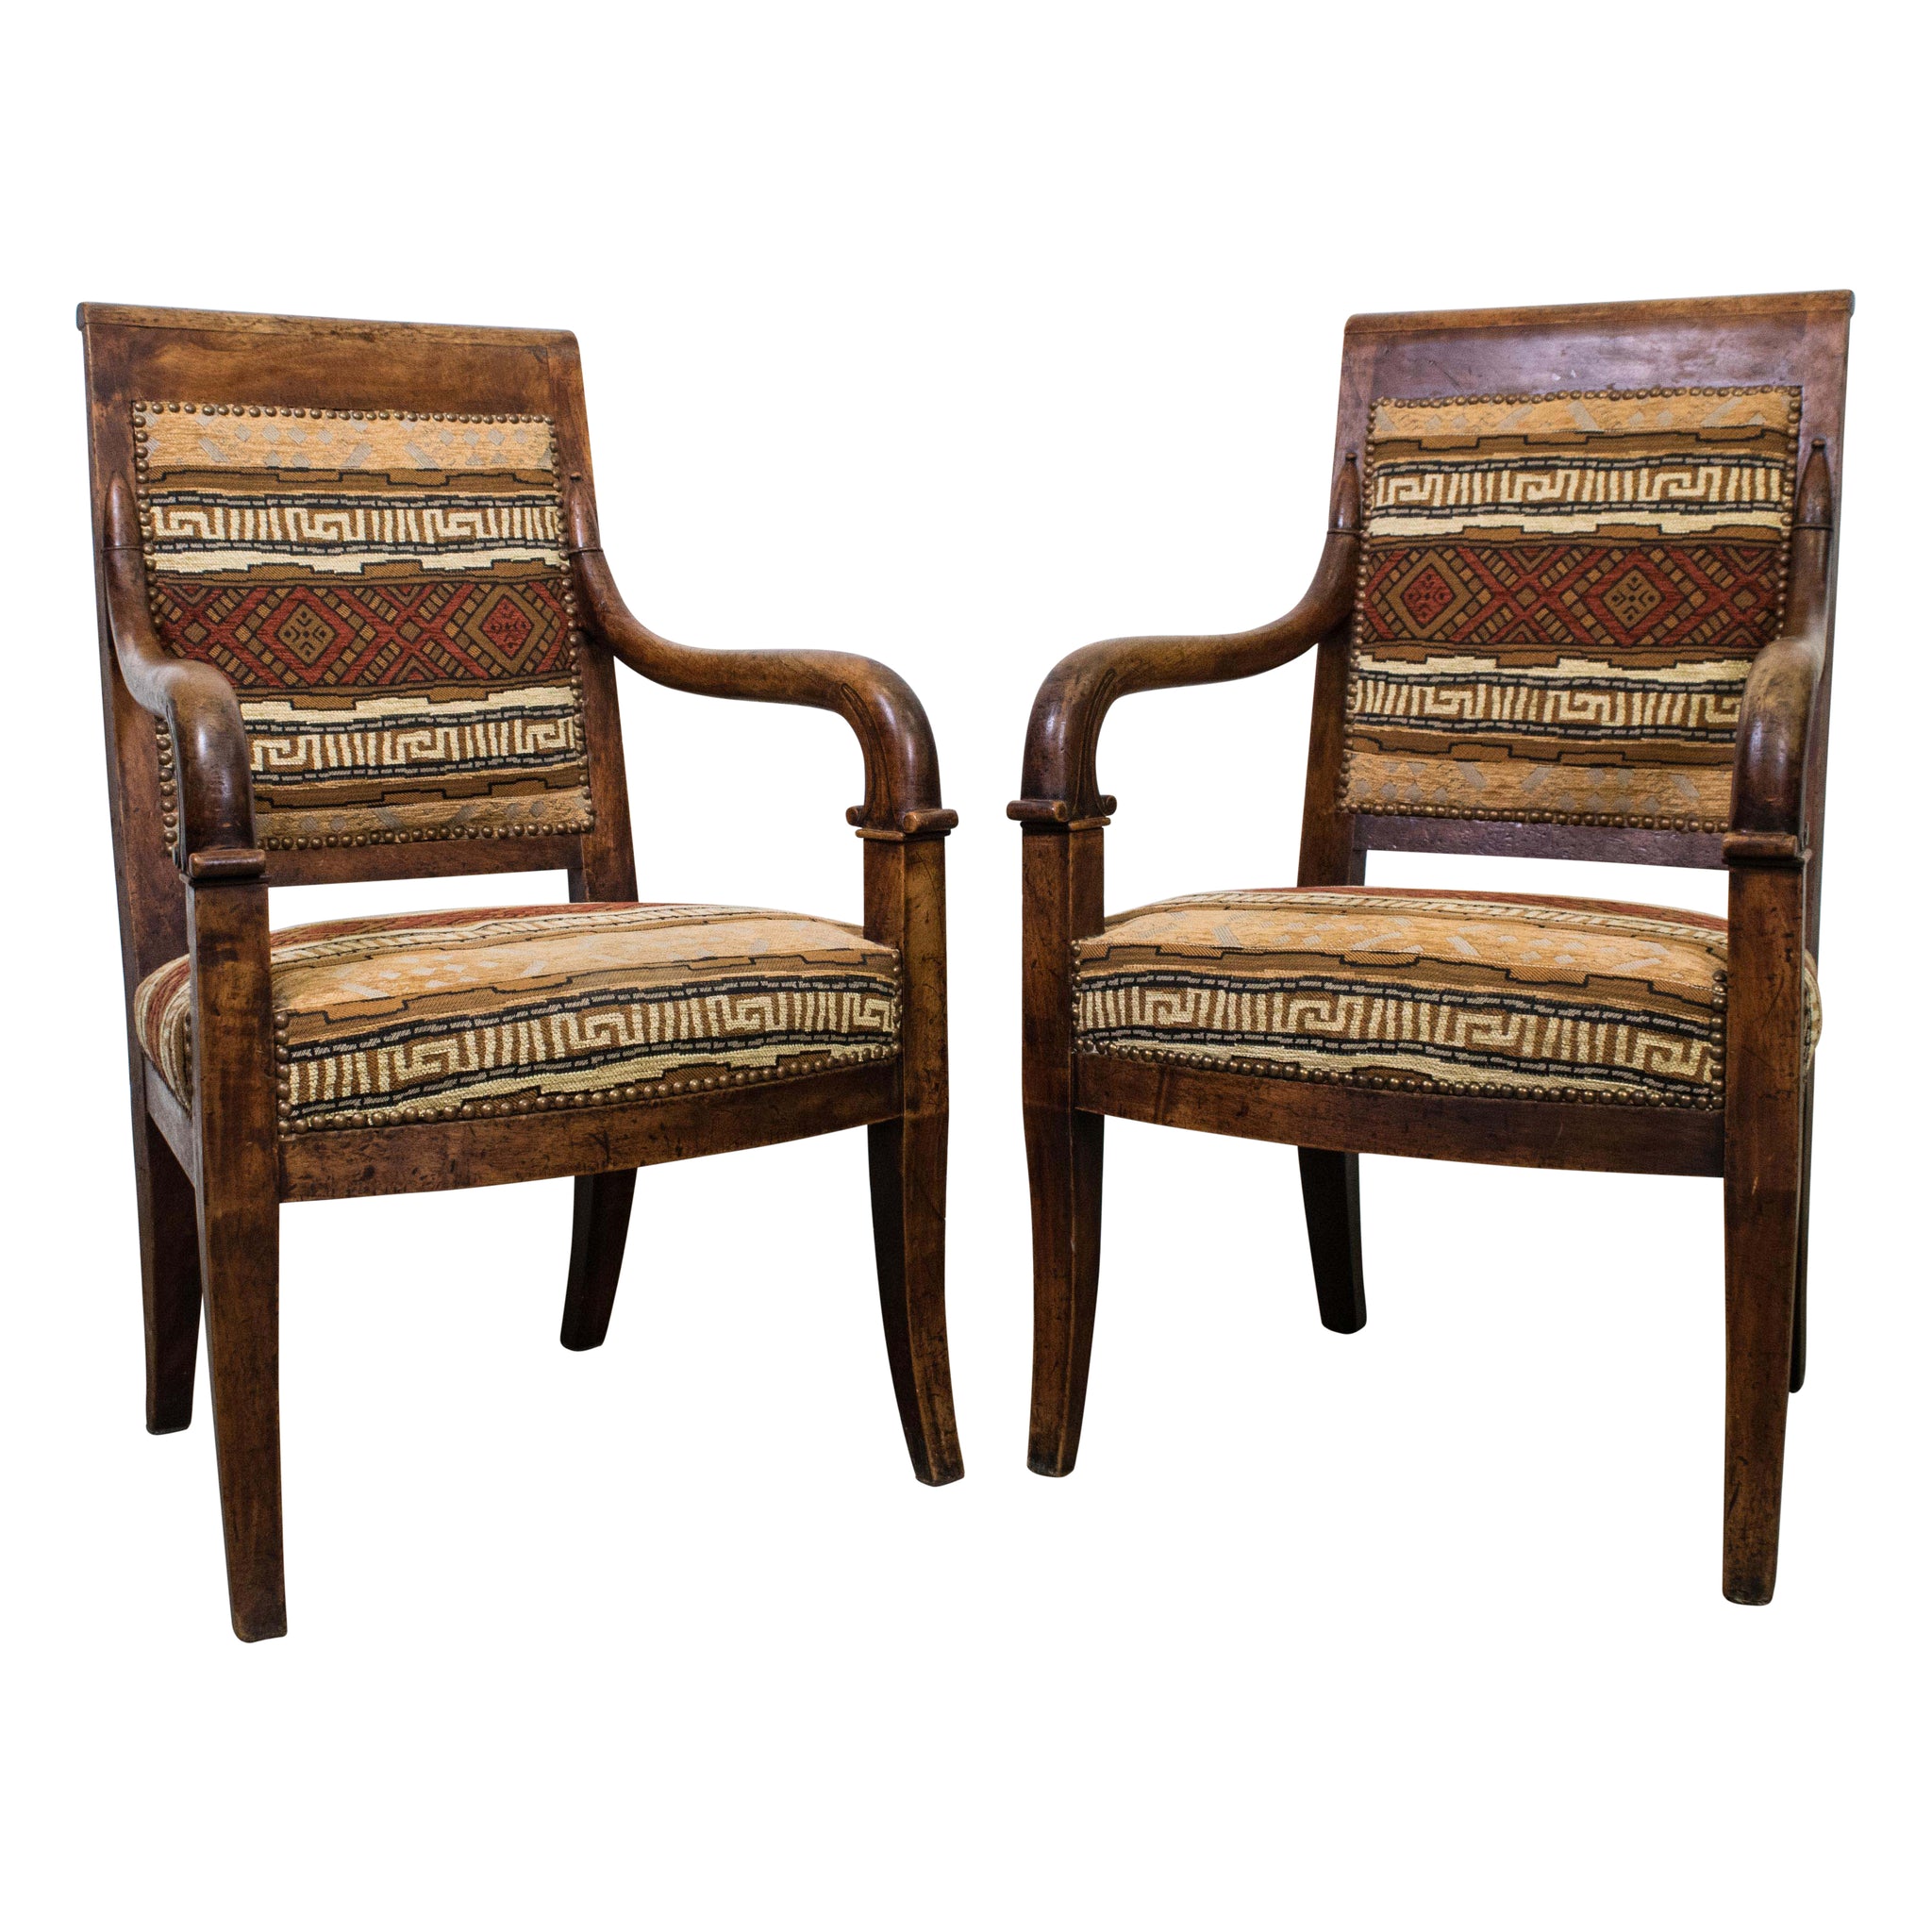 A Pair of French Empire Period Mahogany Armchairs